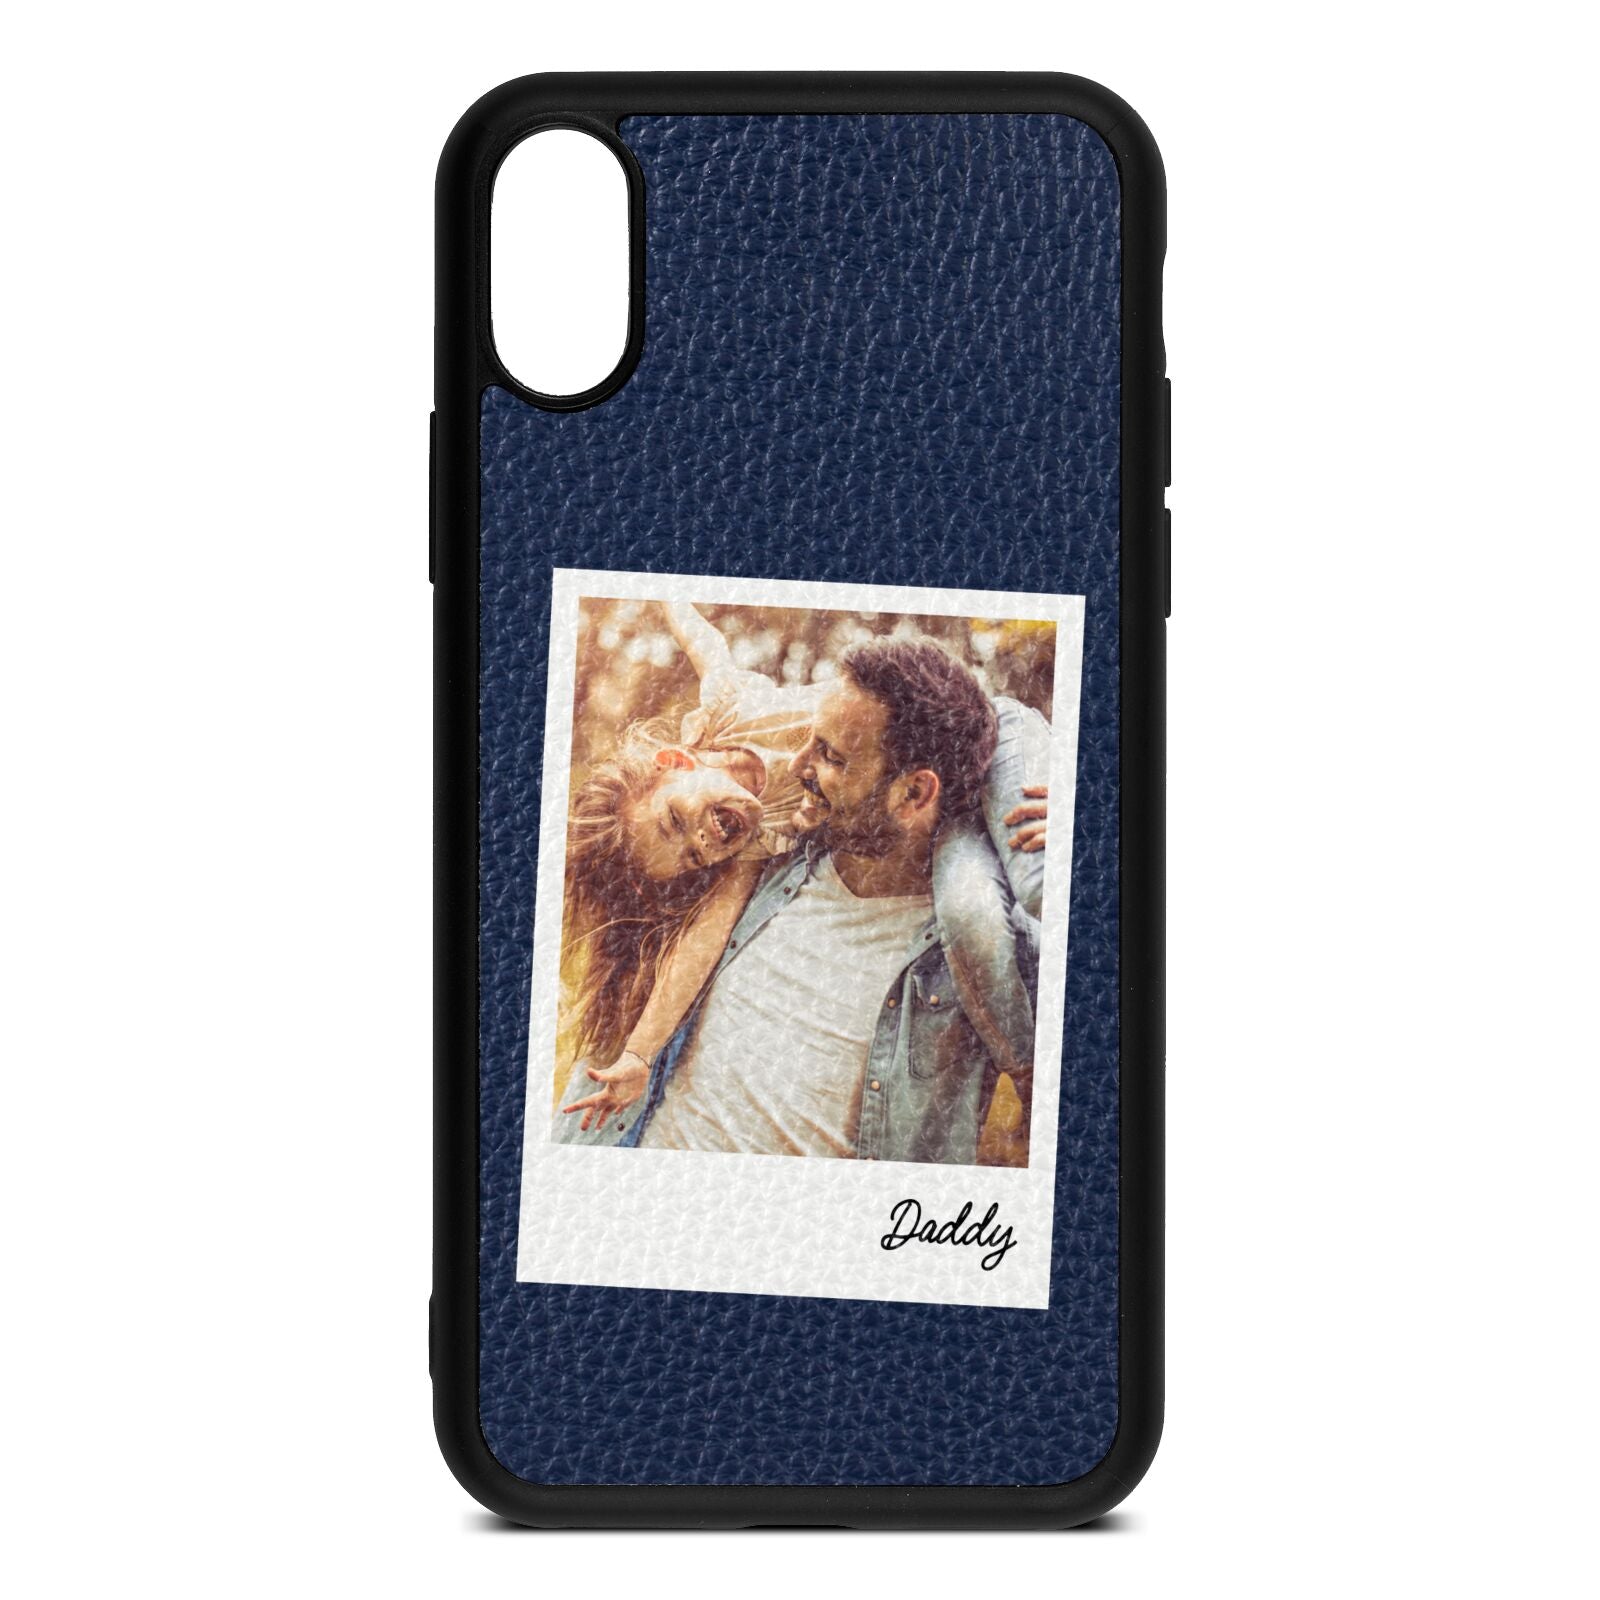 Fathers Day Photo Navy Blue Pebble Leather iPhone Xs Case